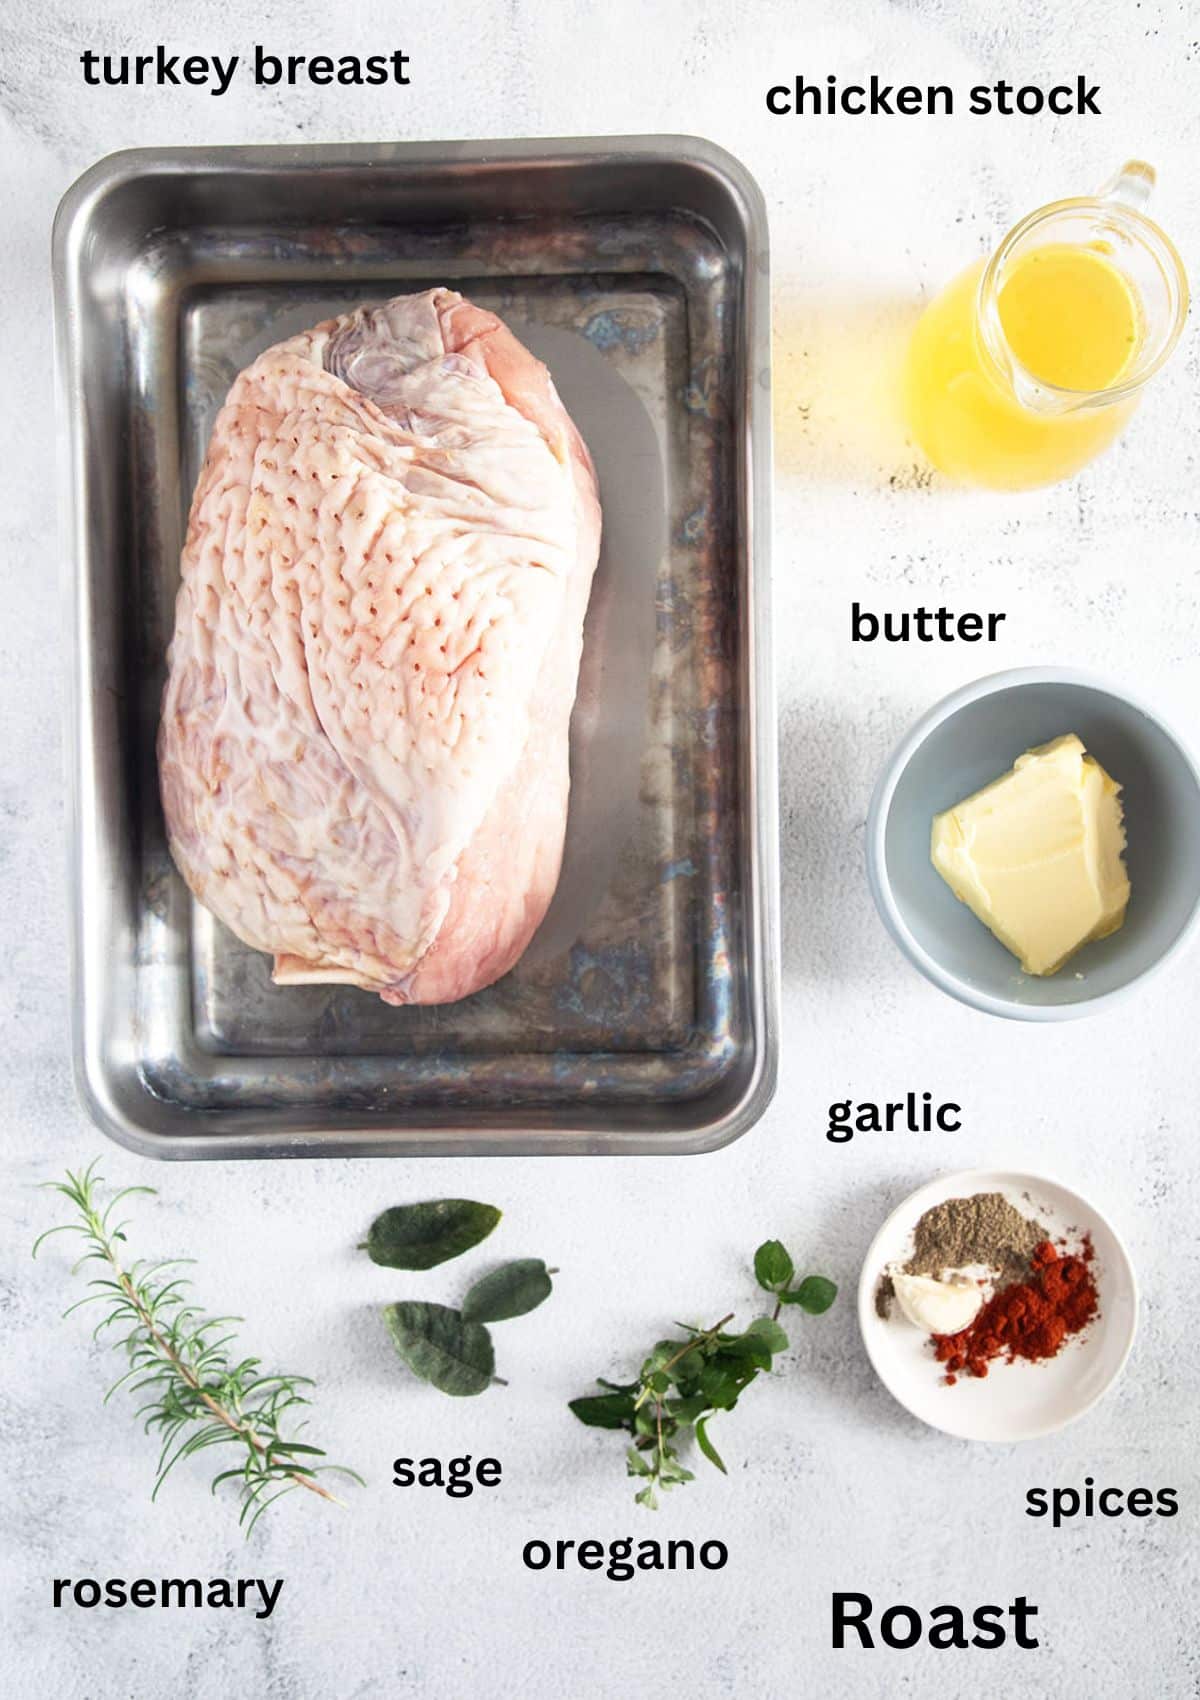 listed ingredients for roasting turkey breast with herbed butter and chicken broth.